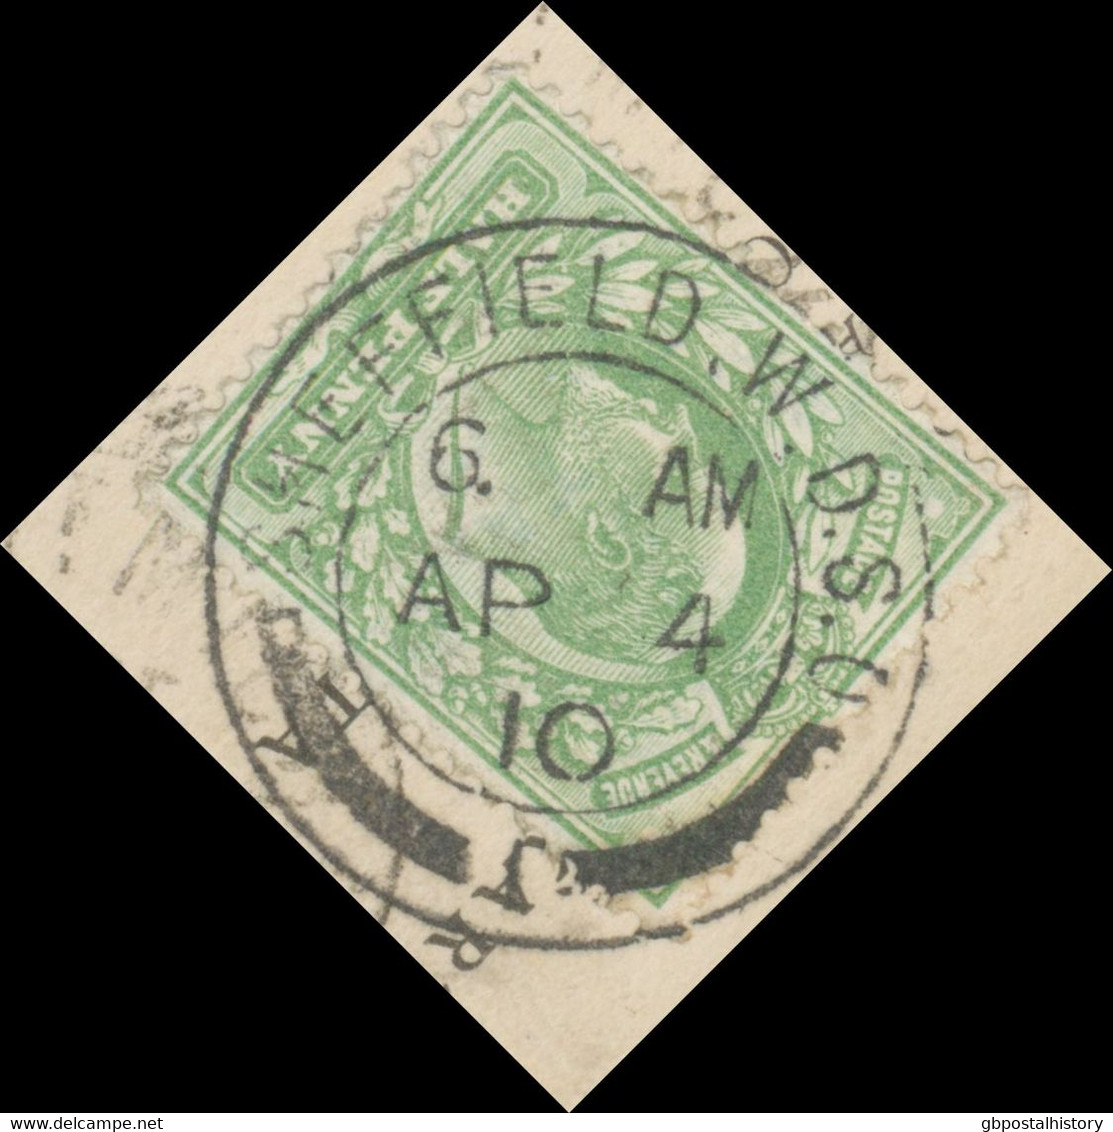 GB 1910 French Pc W 10C From Mont St. Michel REDIRECTED In SHEFFIELD, YORKSHIRE - Covers & Documents